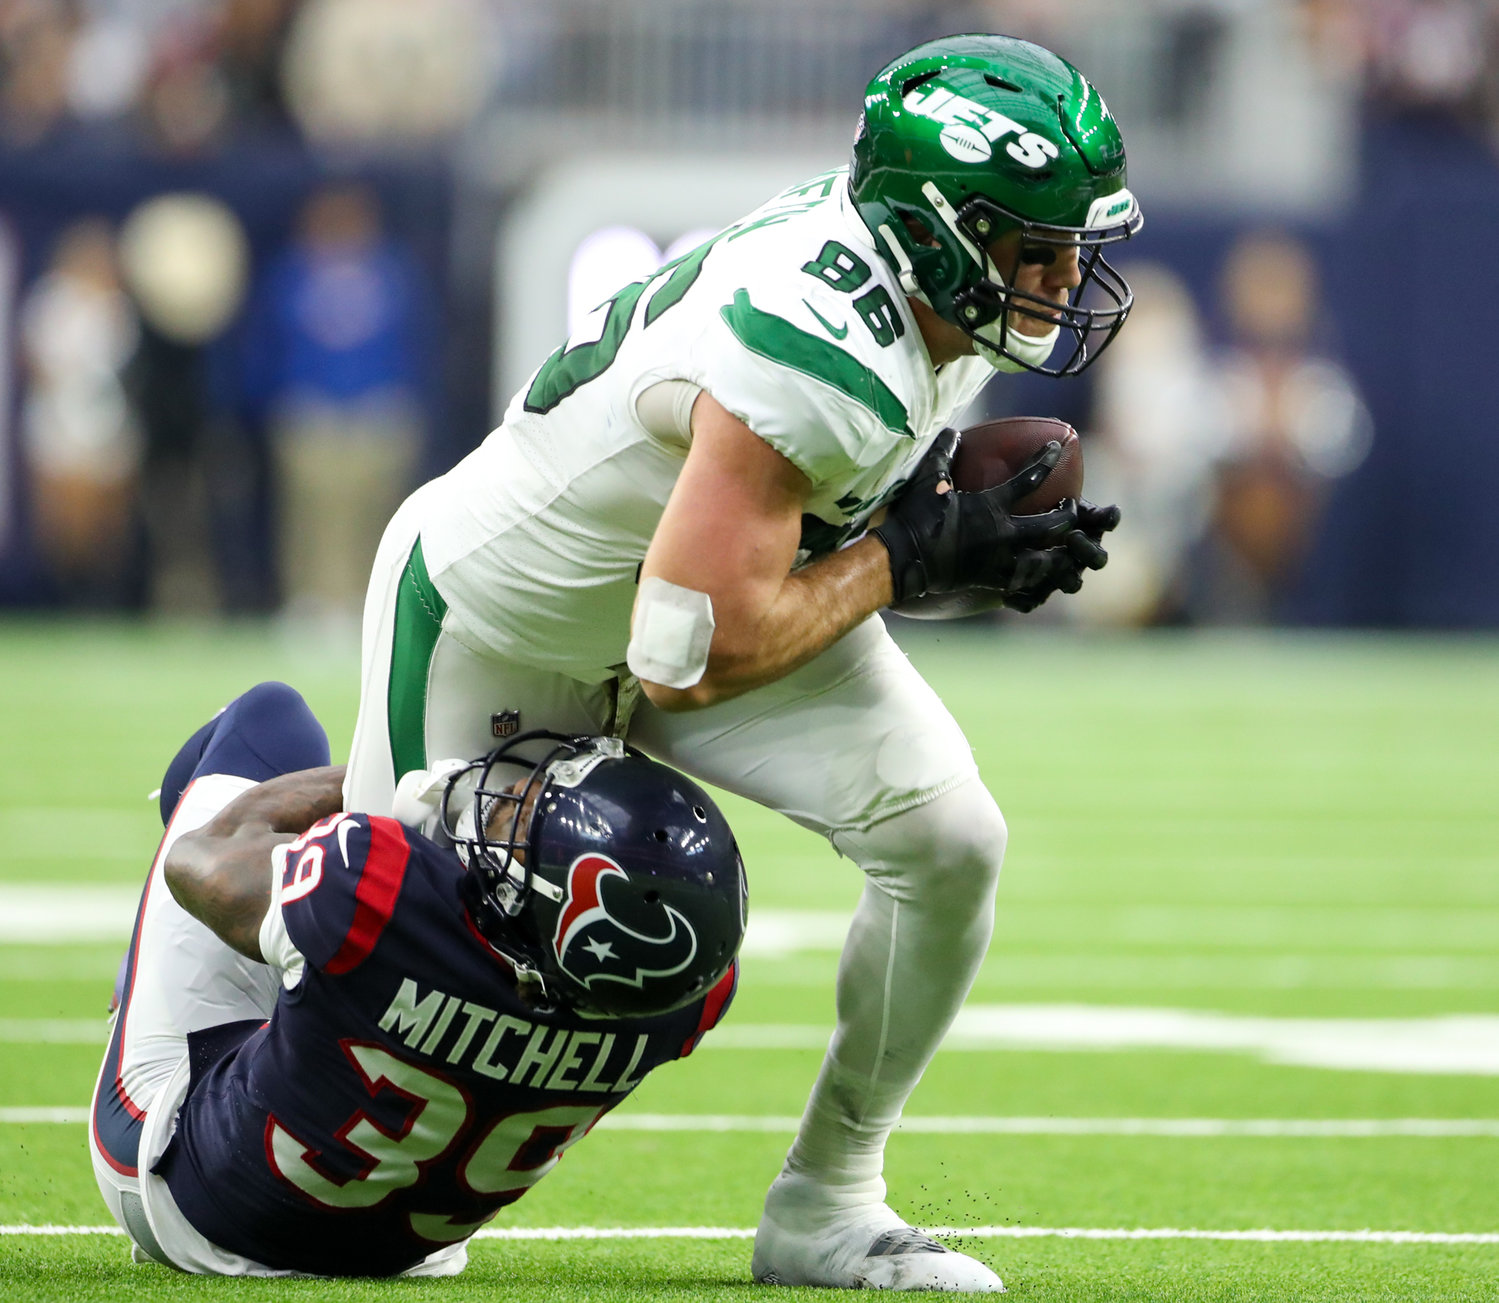 New York Jets tight end Ryan Griffin (86) drags Houston Texans cornerback Terrance Mitchell (39) for additional yards after a catch during an NFL game between the Houston Texans and the New York Jets on November 28, 2021 in Houston, Texas. The Jets won, 21-14